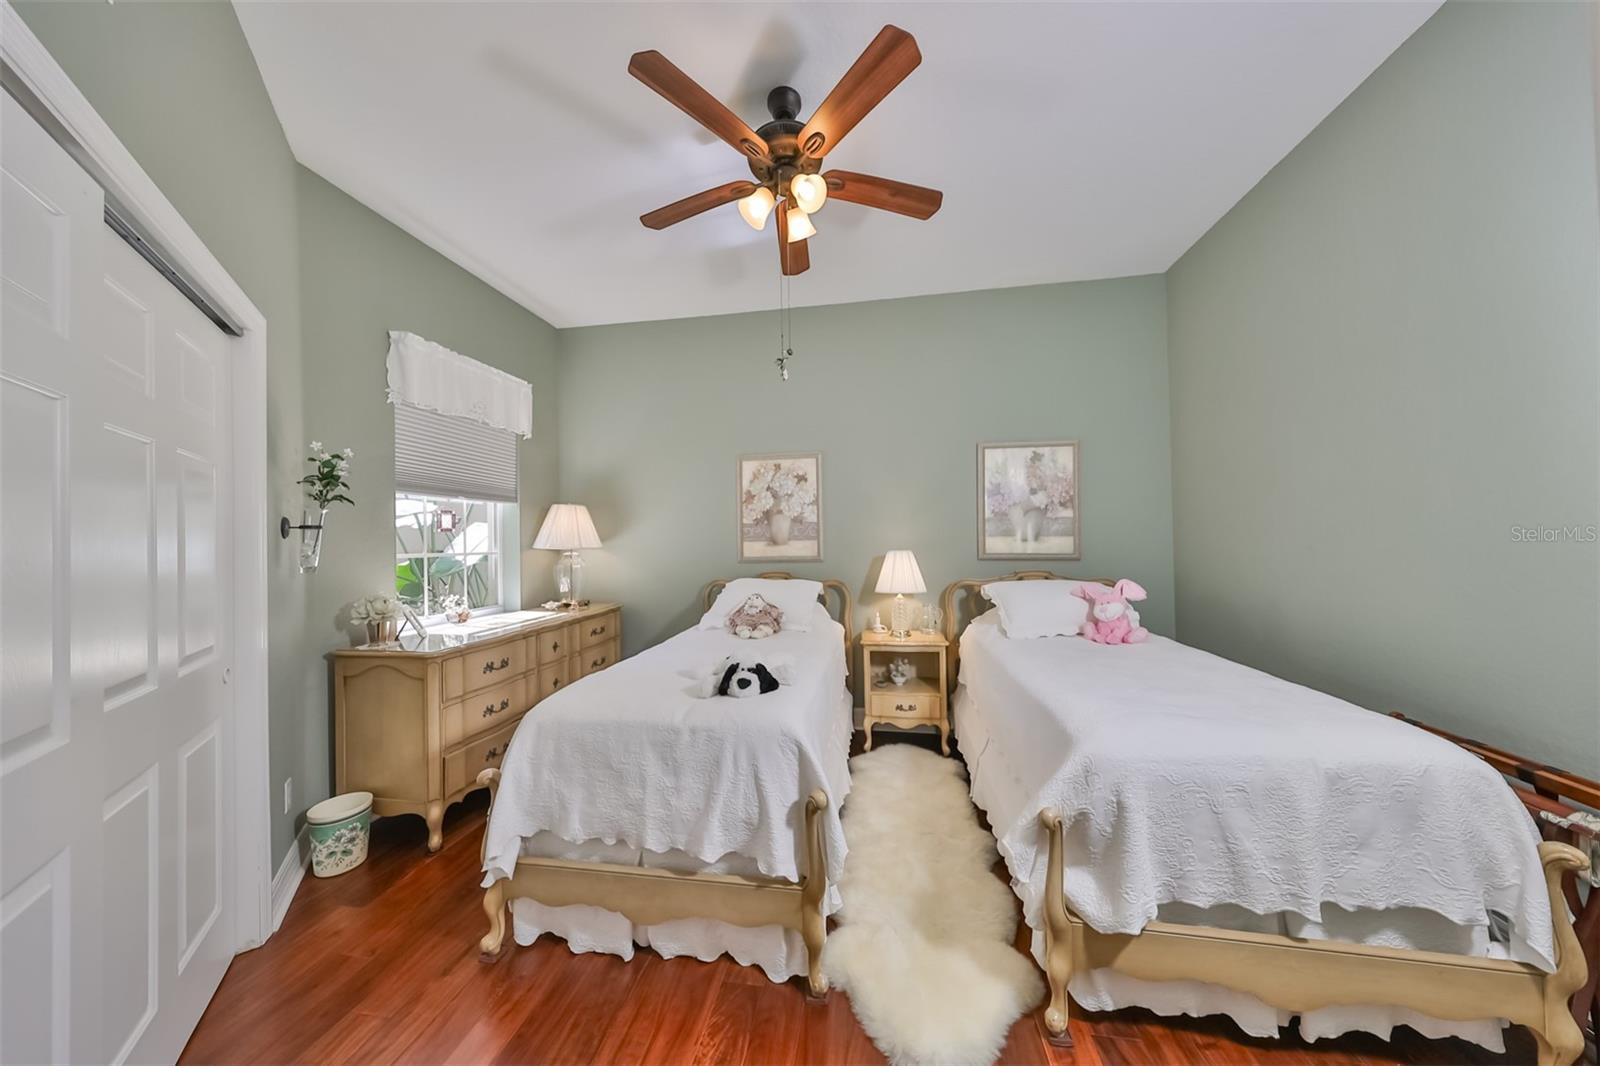 Bedroom #2 has stunning Acacia wood flooring, a large window with custom blinds and a ceiling fan.